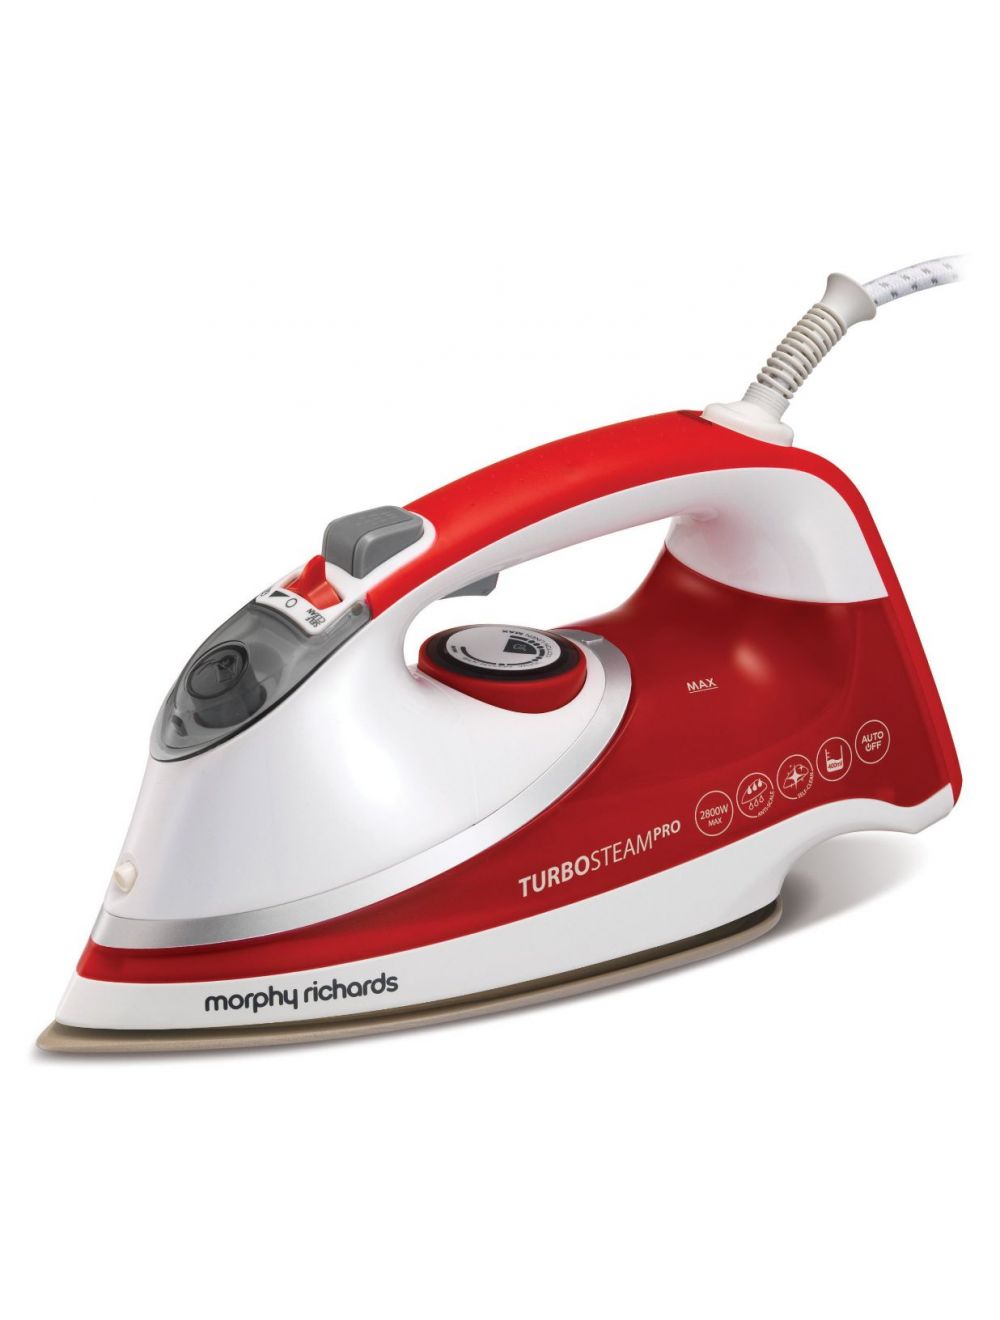 Morphy Richards 2800w Turbosteam Pro Pearl Ceramic Steam Iron Red-303124